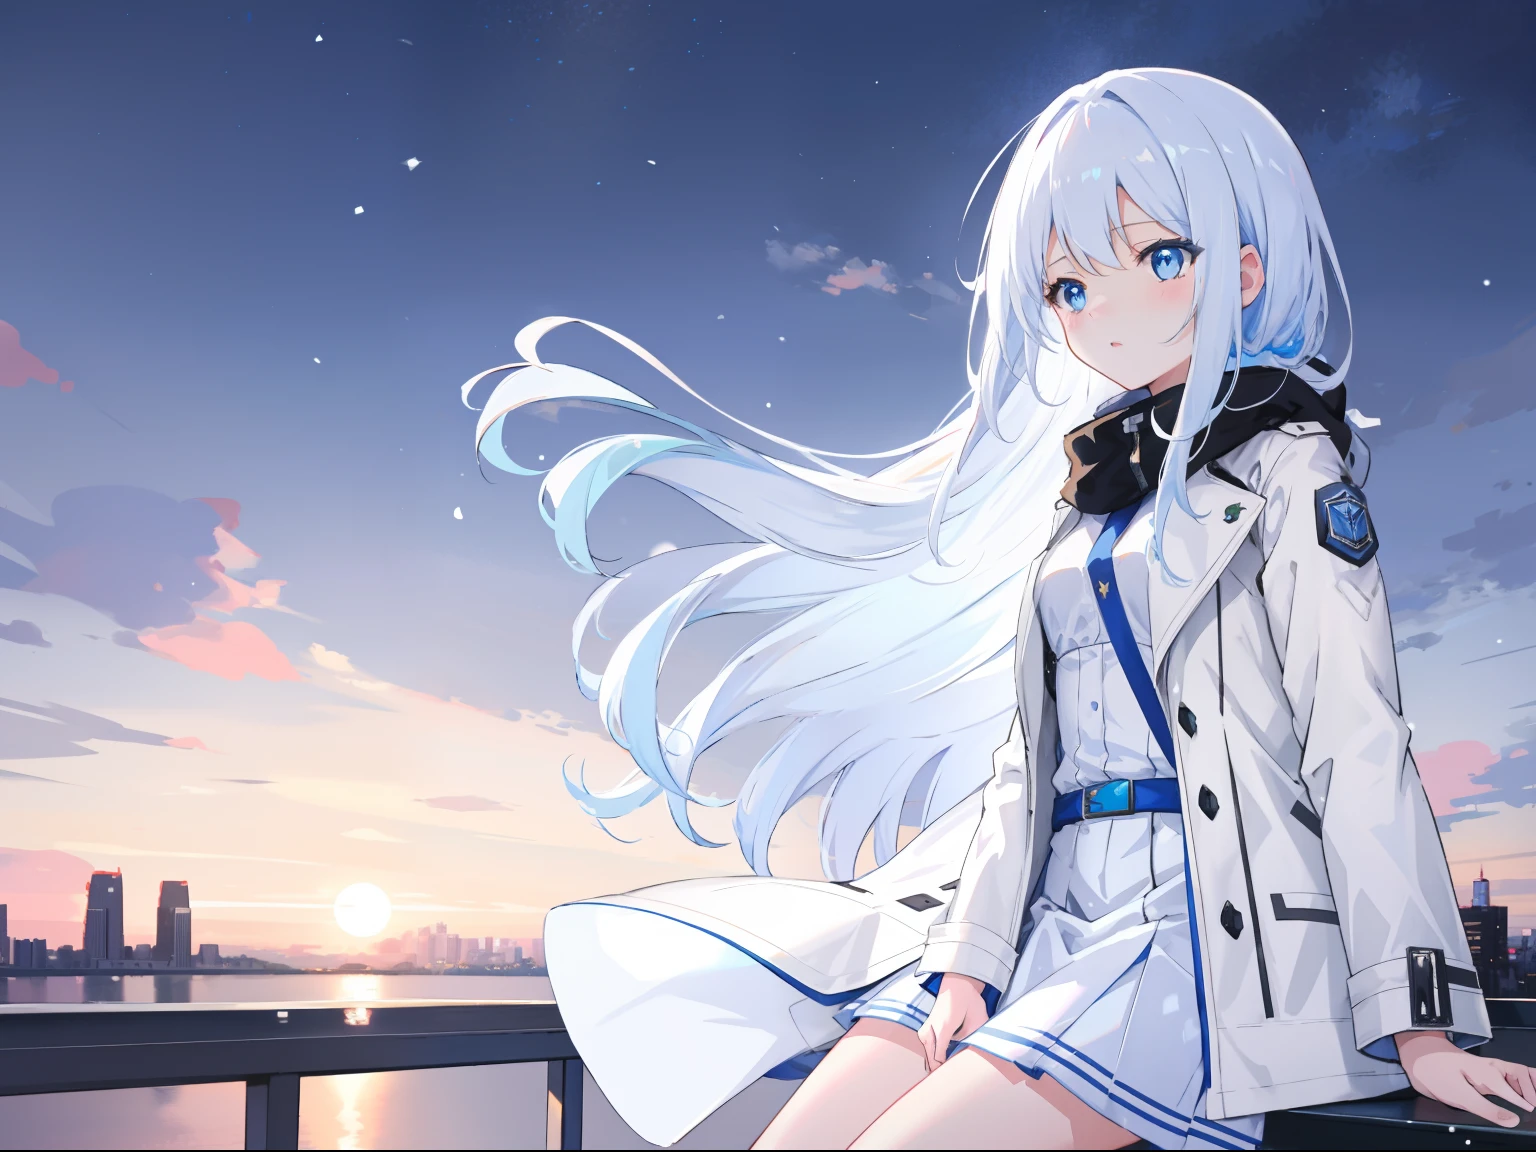 Em uma cidade grande，It's snowing，neonlight，1girll，White color hair，long whitr hair，blue color eyes，（Carefully portray the face），Height 166cm，high school senior，sitting before a table，adolable，White trench coat，Glazed eyes，Gape，sleepy-eyed，（Carefully depict the action），（Carefully portray clothes），（Carefully depict the expressions），Day Man Girl，tmasterpiece，8k wallpaper，Ambient light，Small breasts，At night，